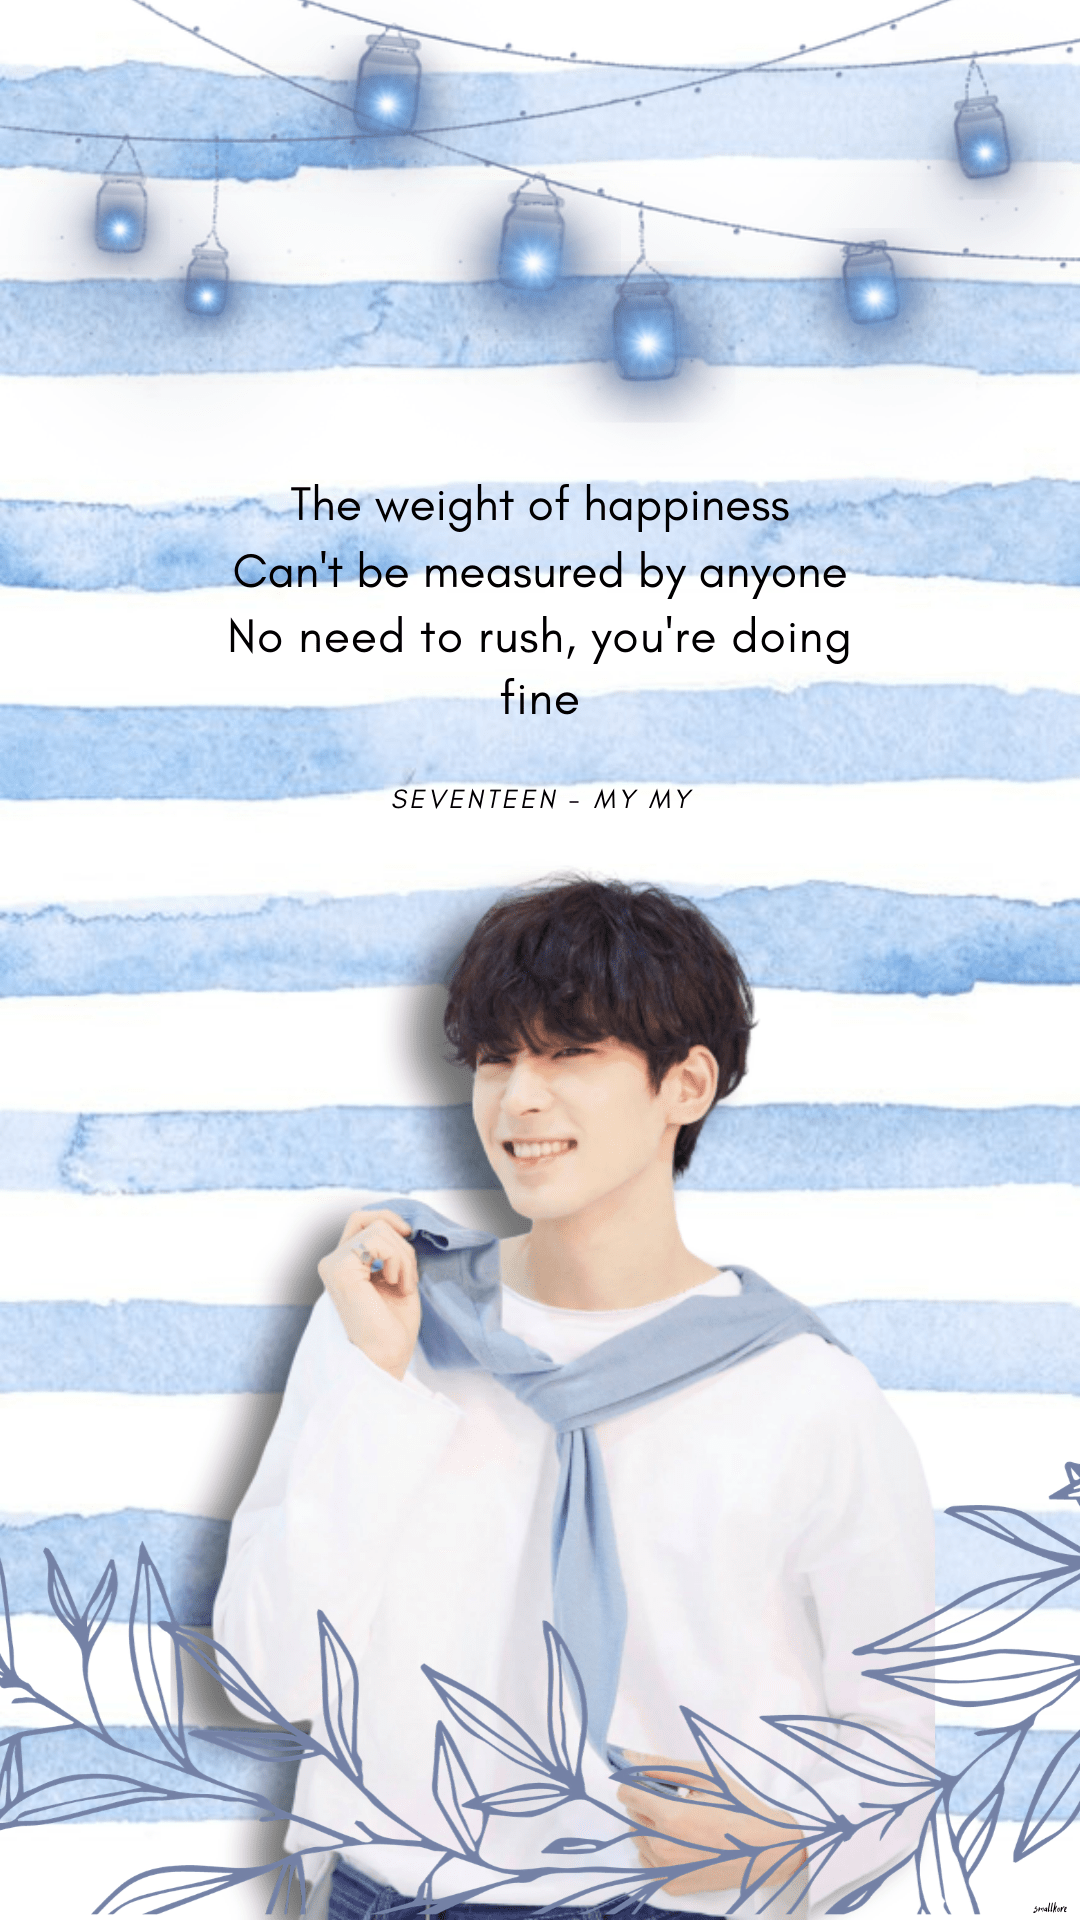 Wallpaper of SEVENTEEN's MY MY with a quote about happiness - Birthday